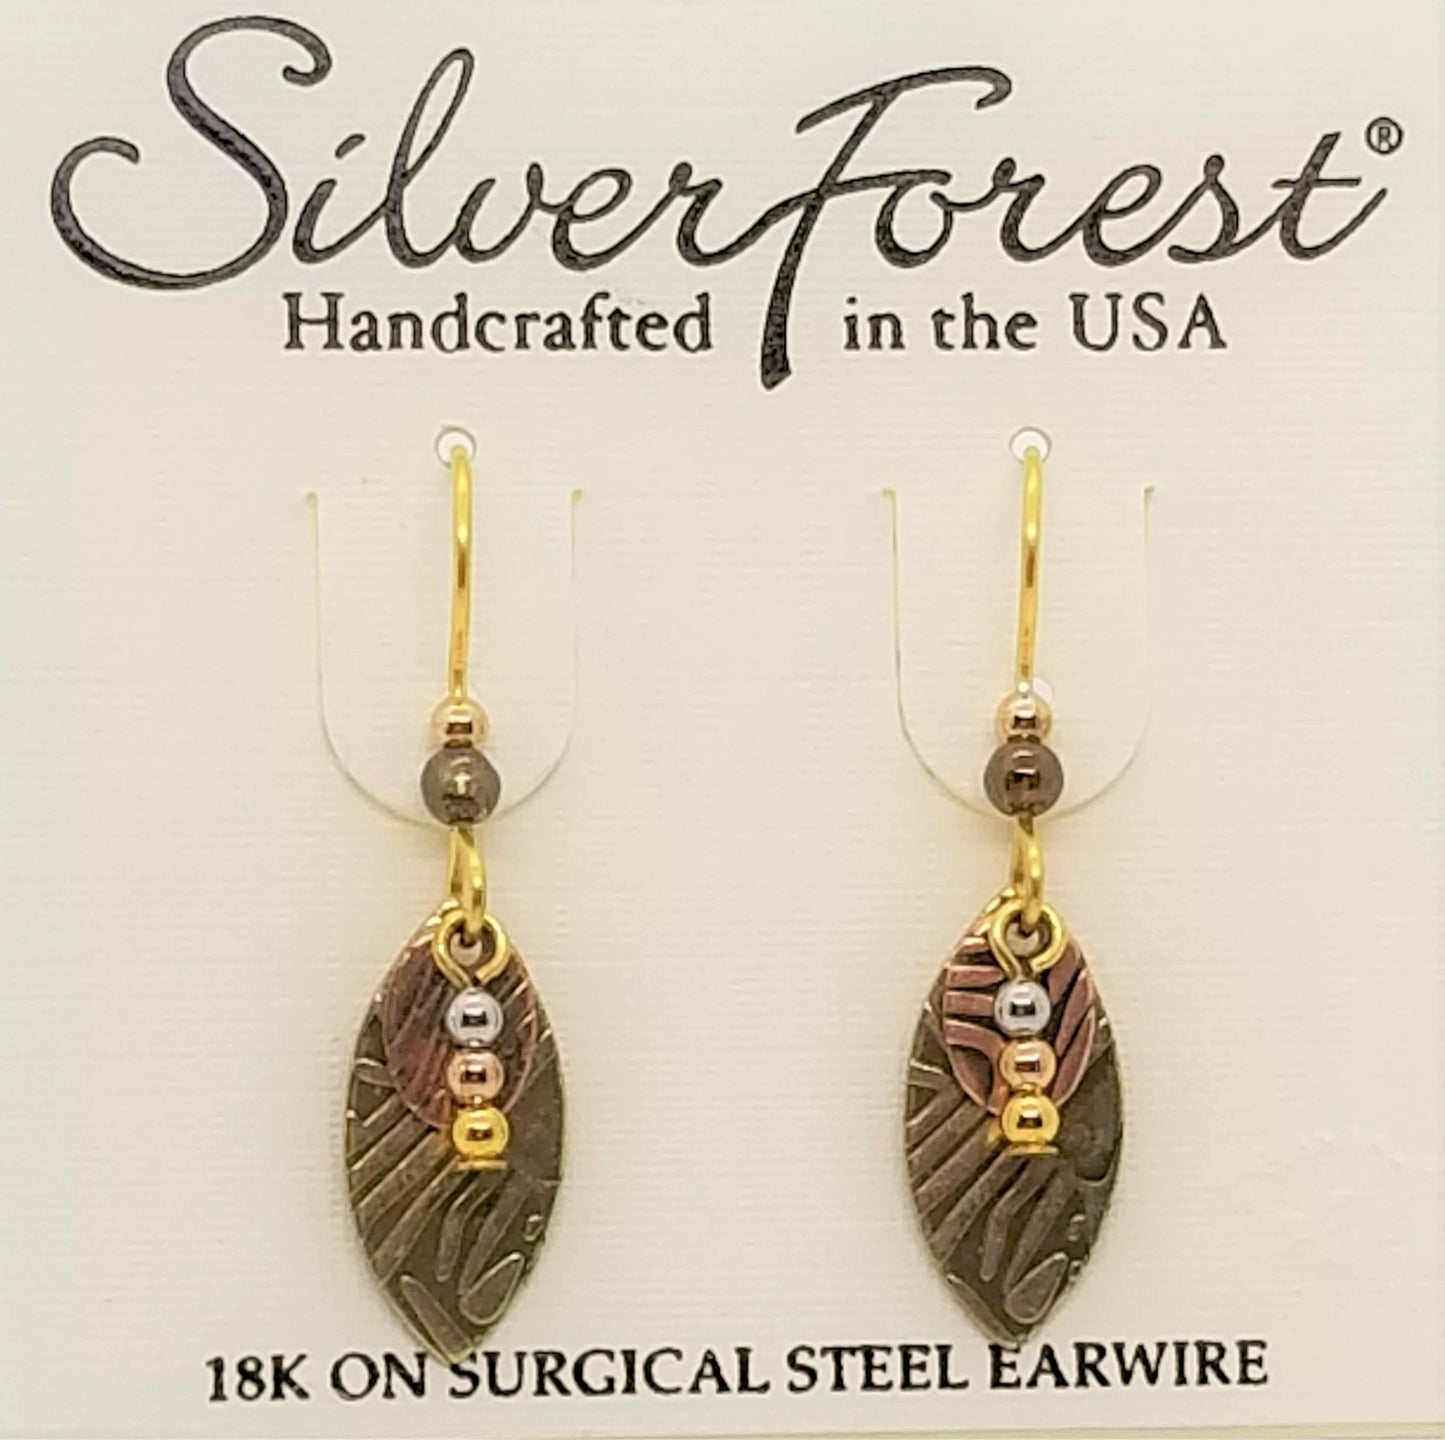 Silver forest 8kt gold plated surgical steel ear wires earrings